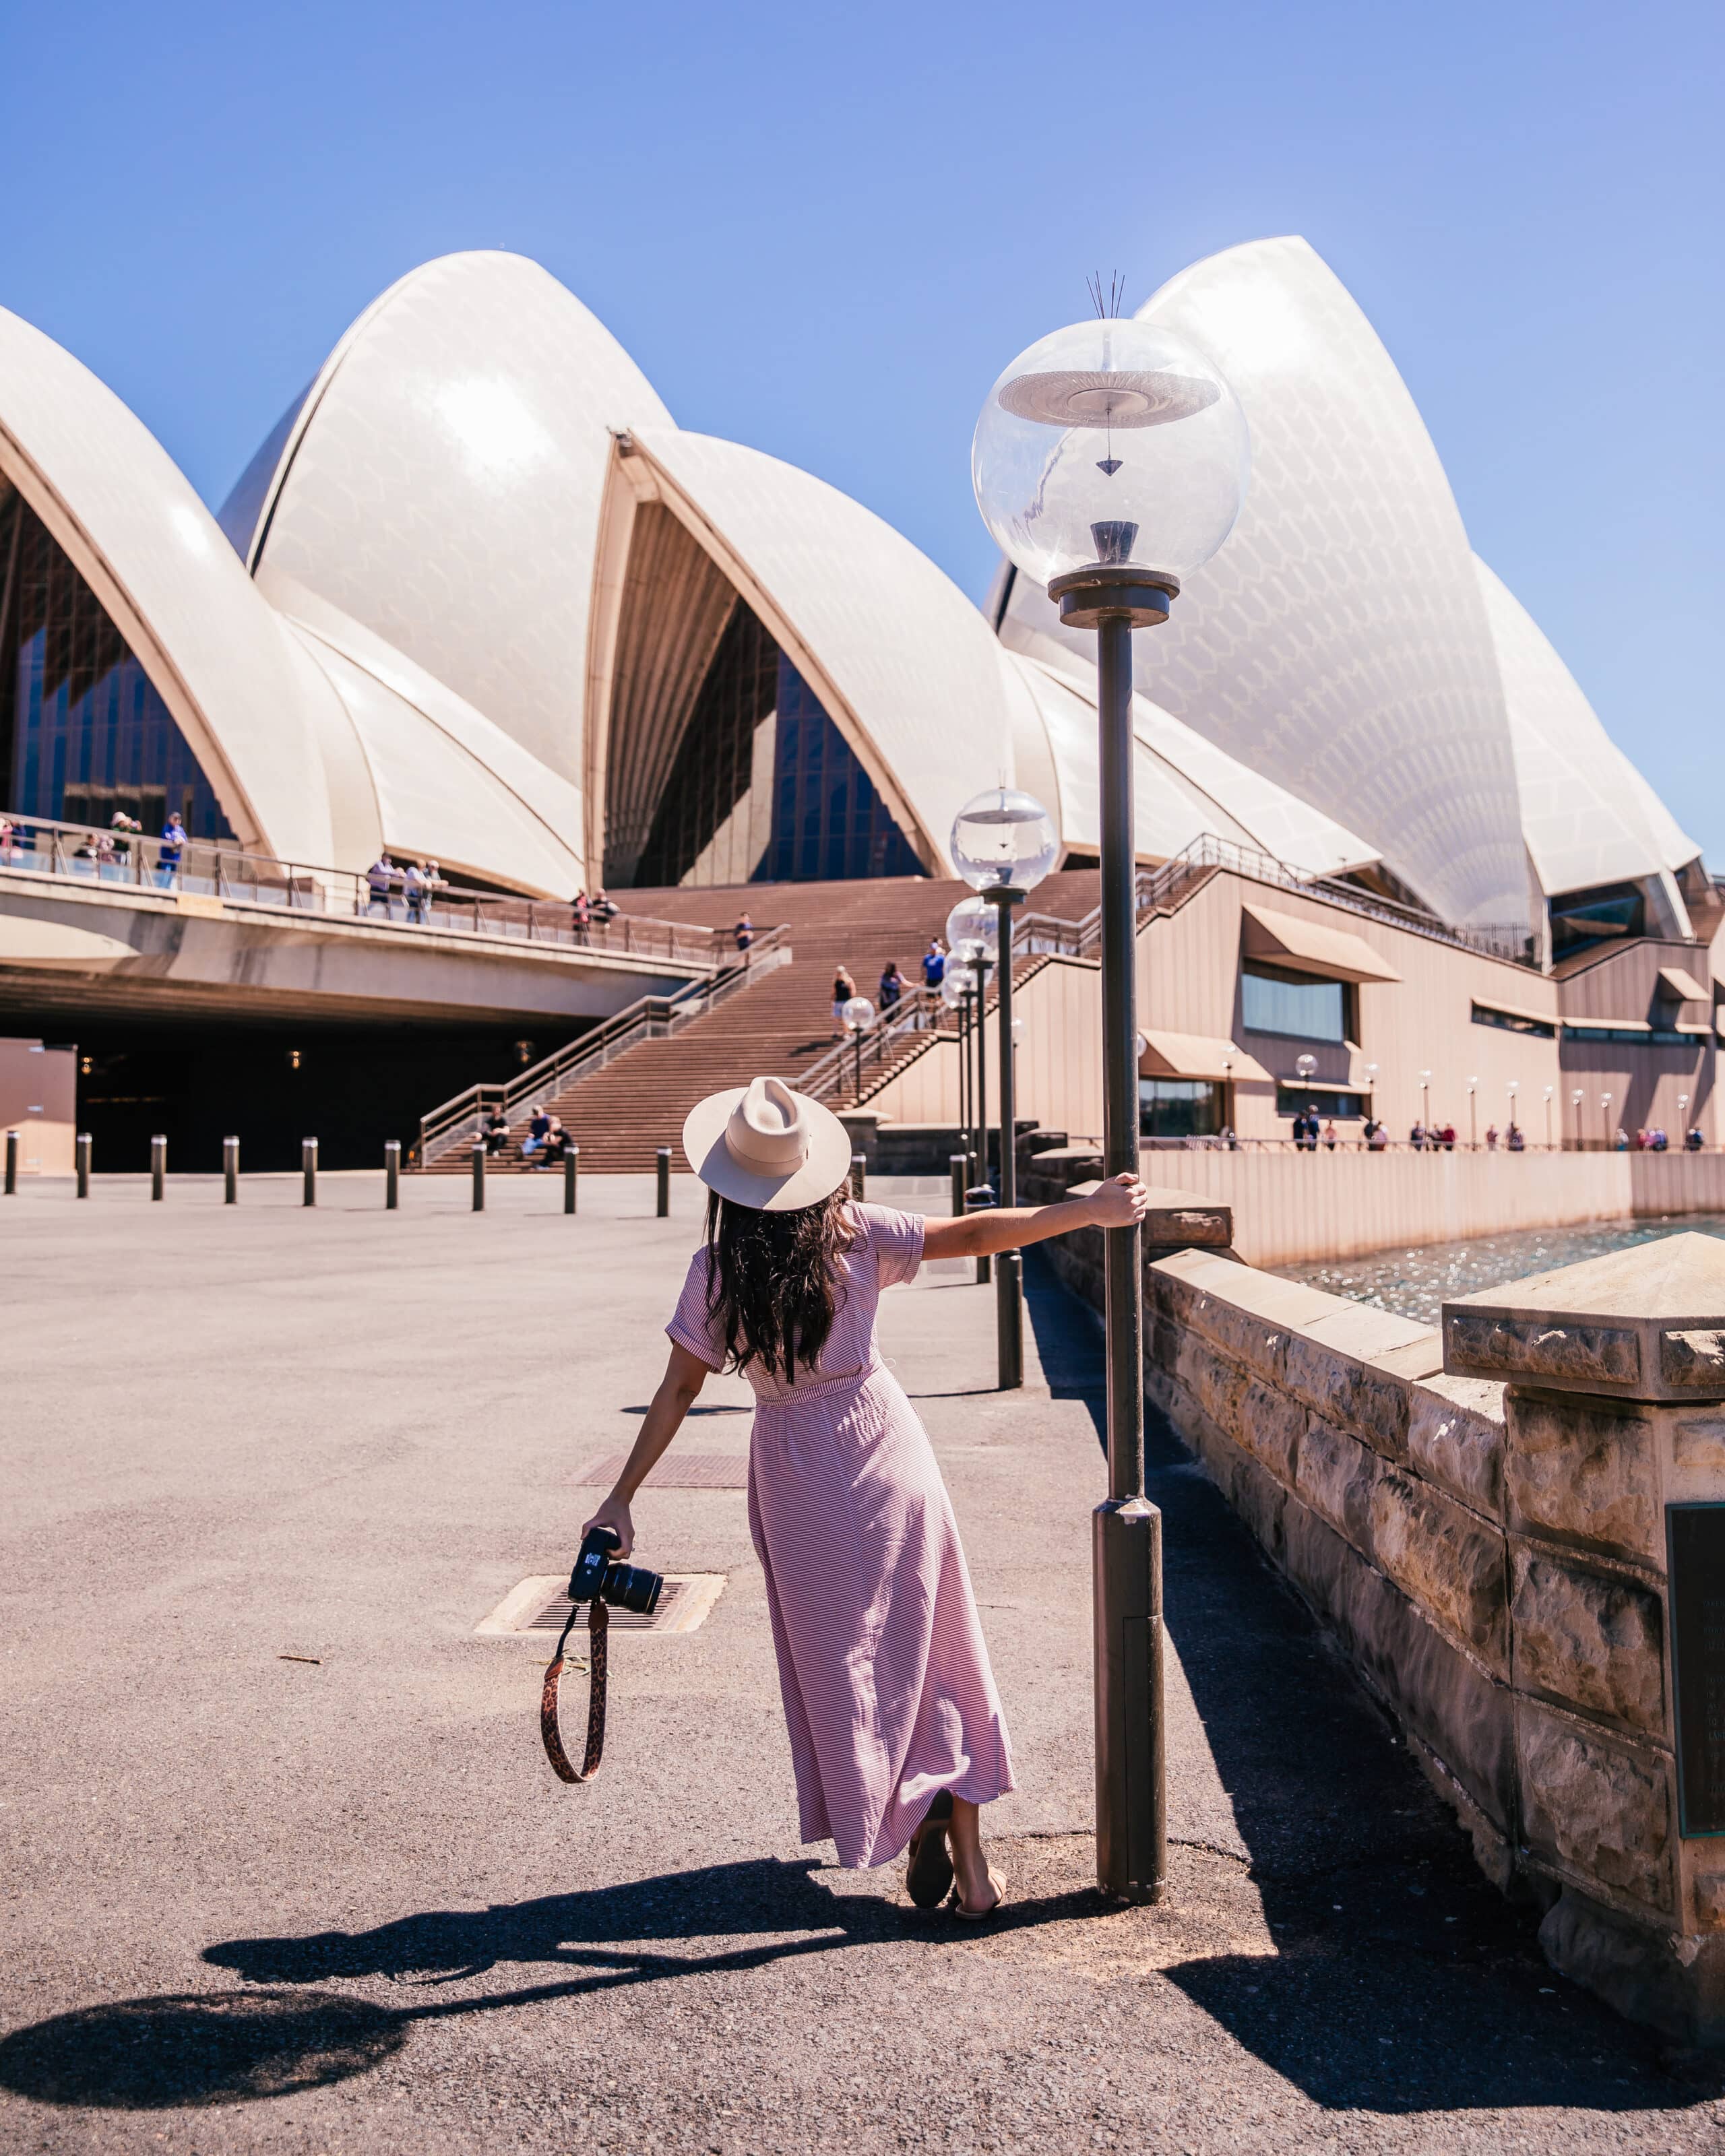 The 37 Most Instagrammable Places in Sydney (With a Map & Photos)